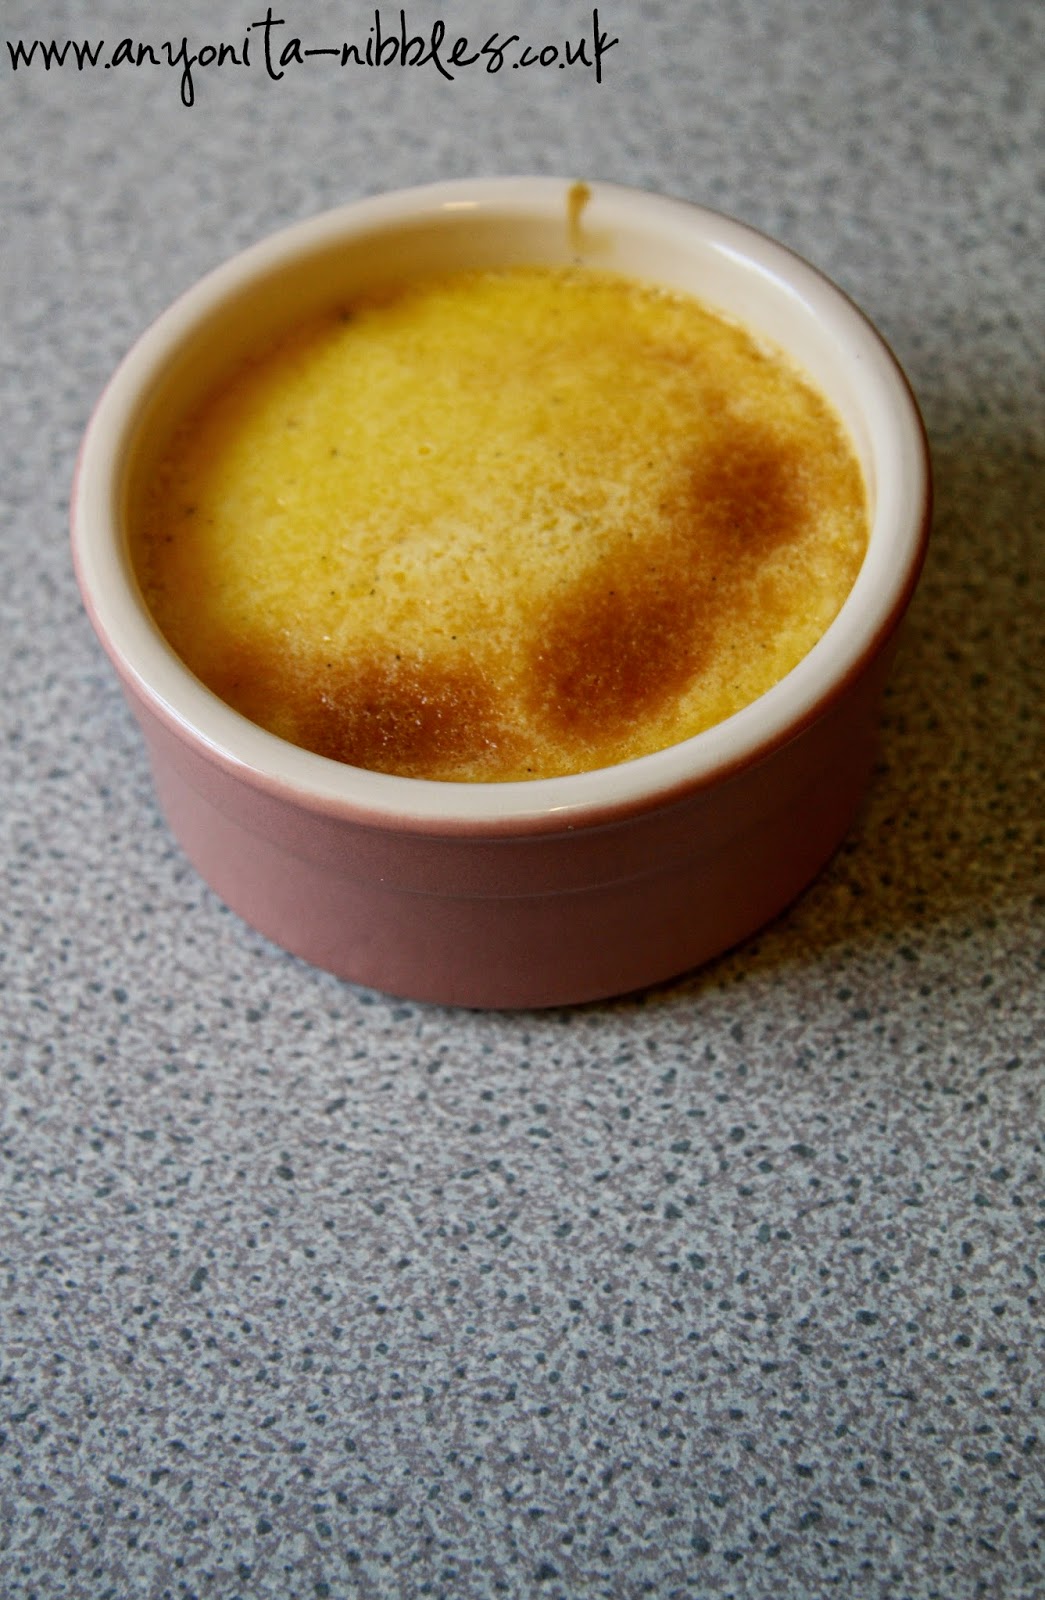 Bake the crème brûlée for 40 minutes and then chill for 2 hours. From Anyonita Nibbles